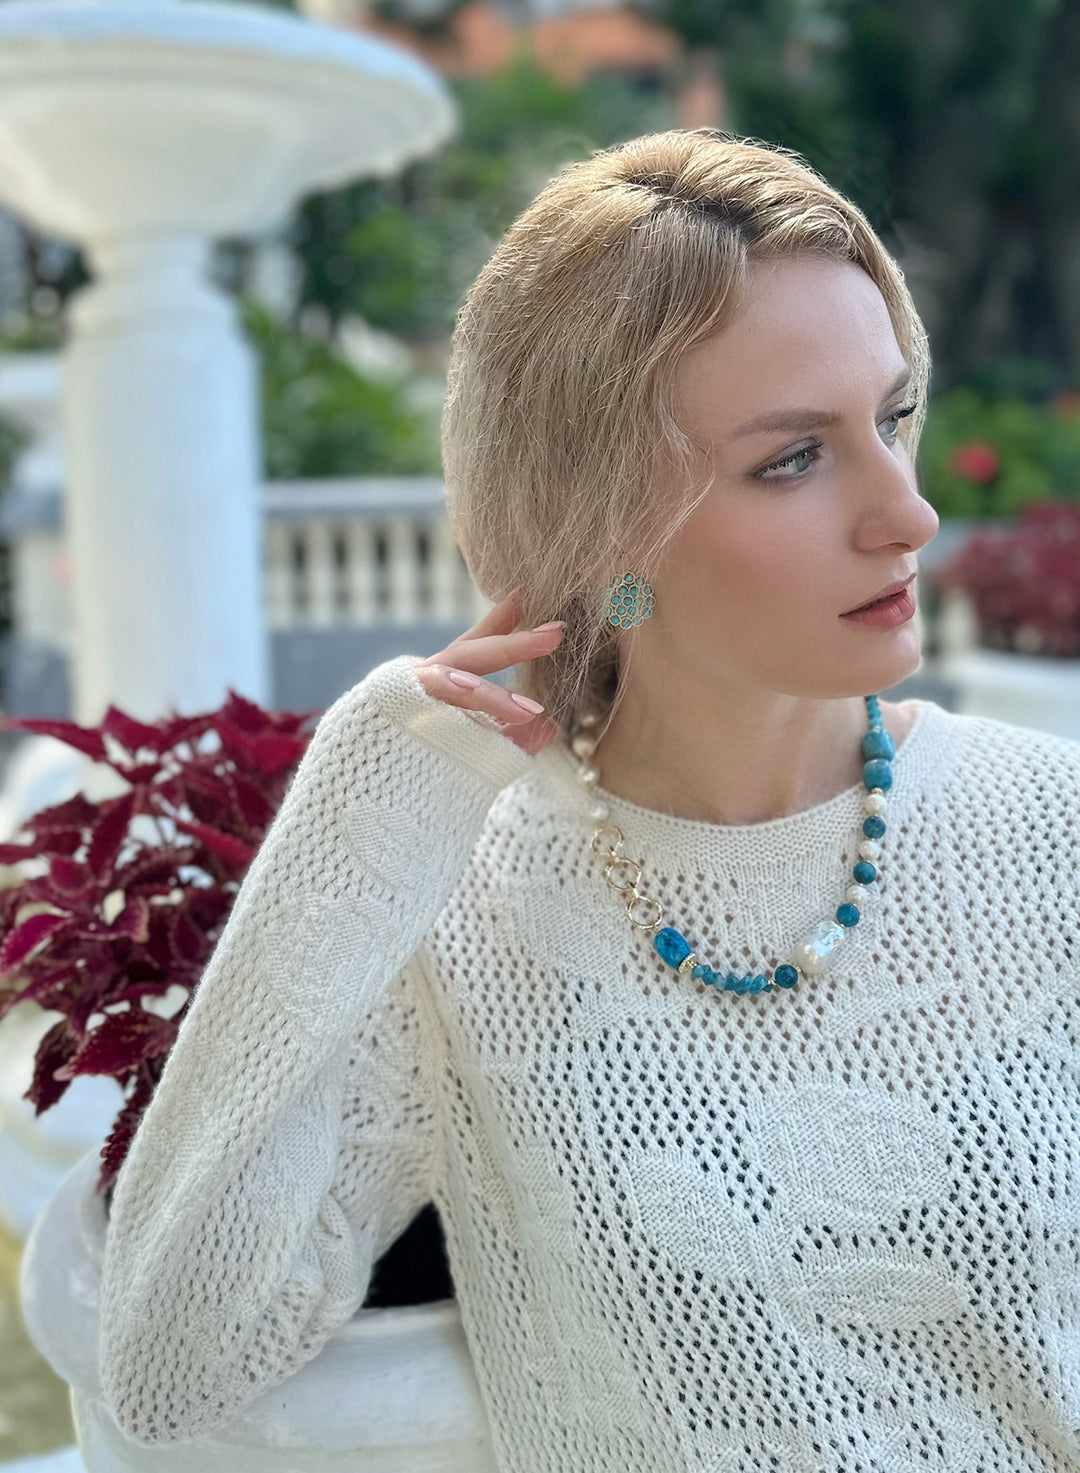 Make a statement with this chic necklace that effortlessly blends sophistication and natural allure